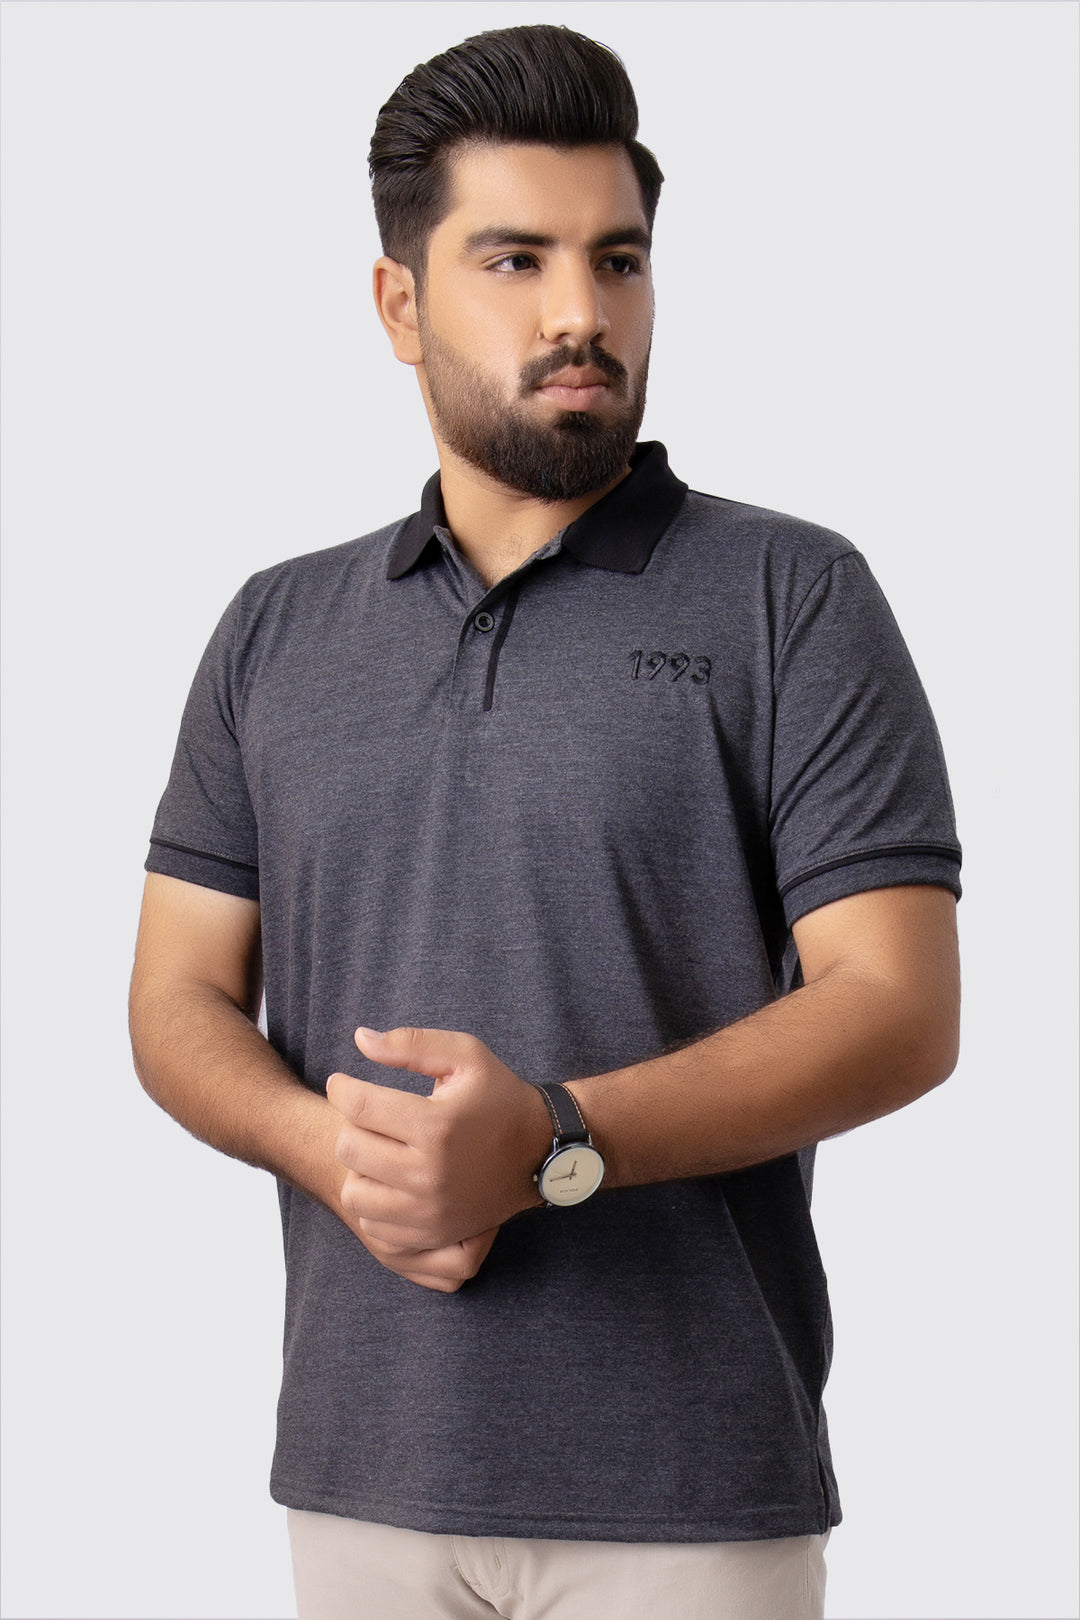 Charcoal Melange Contrast Embroidered Polo Shirt (Plus Size) - A23 - MP0210P